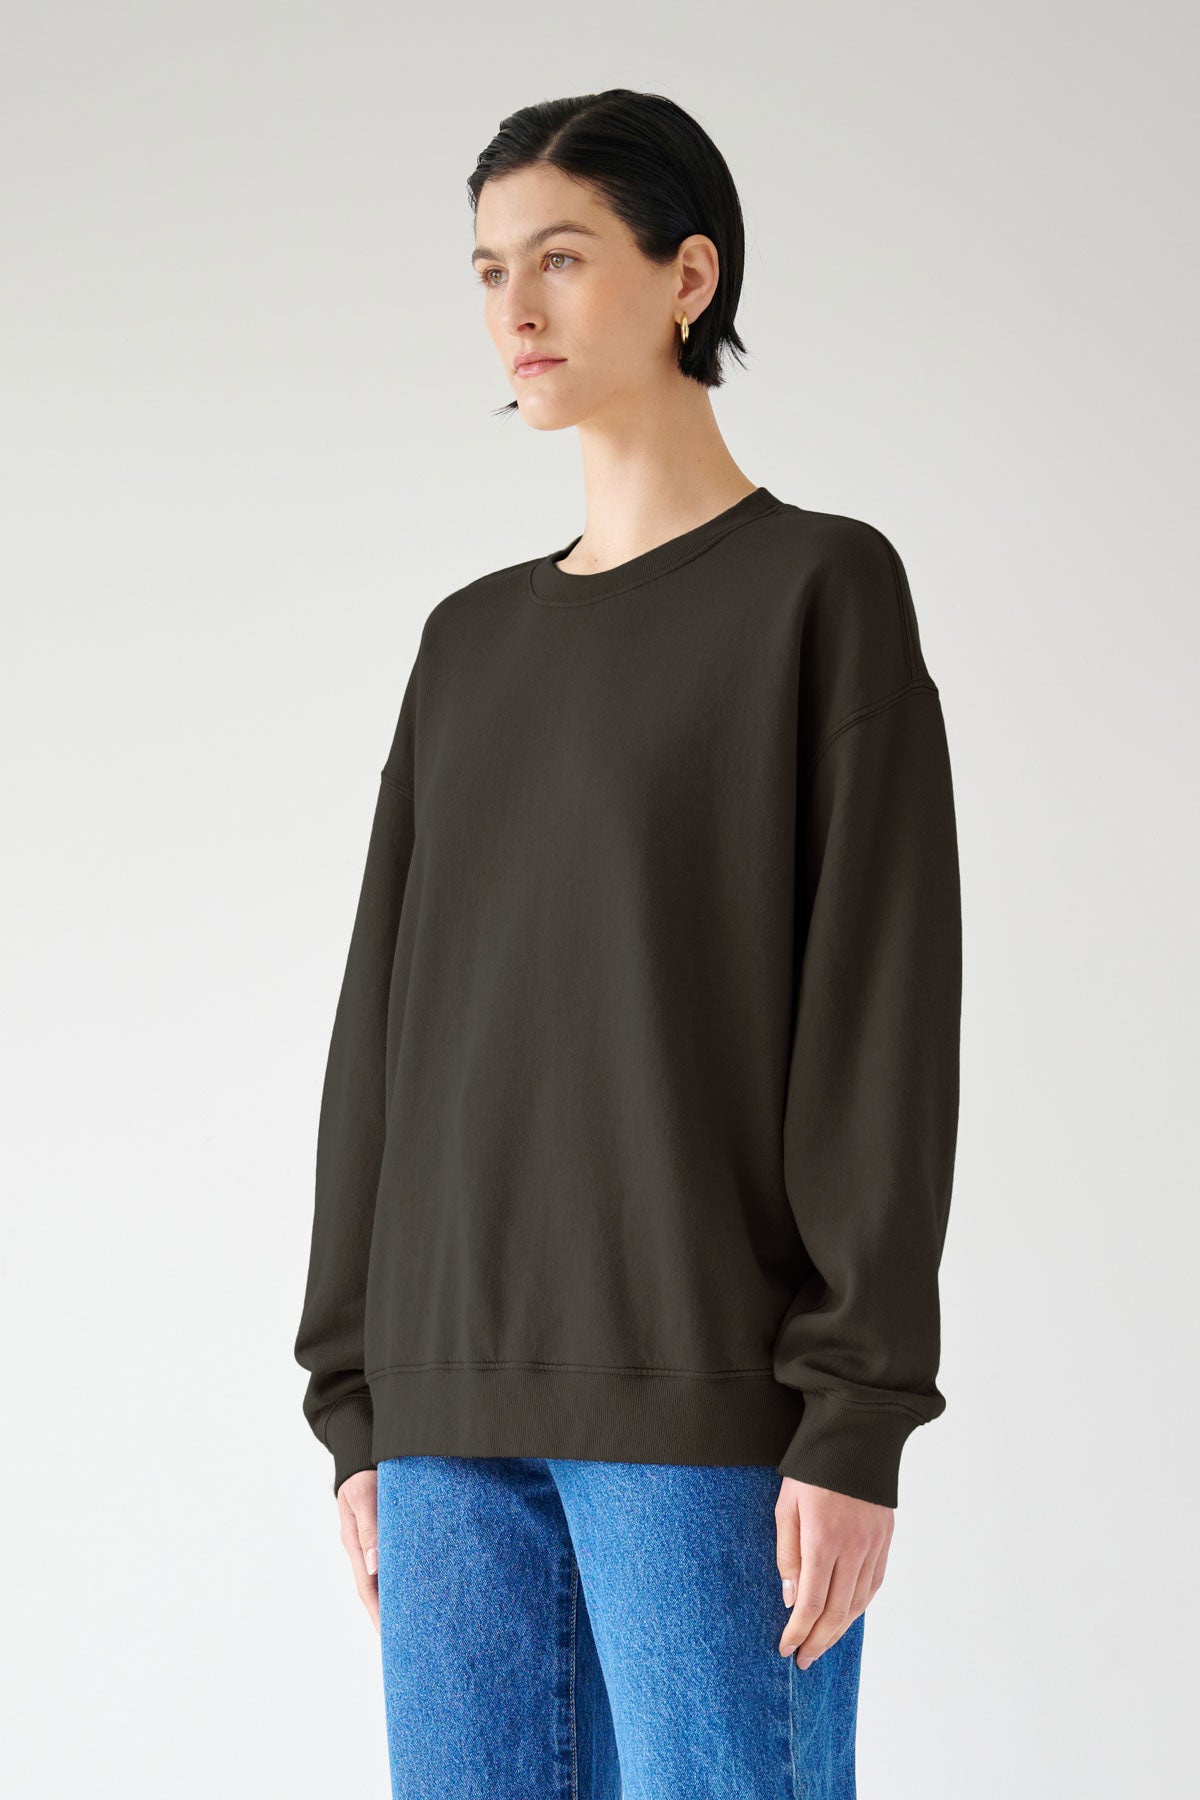 The model is wearing a slouchy black Velvet by Jenny Graham Abbott sweatshirt and jeans.-35200265322689